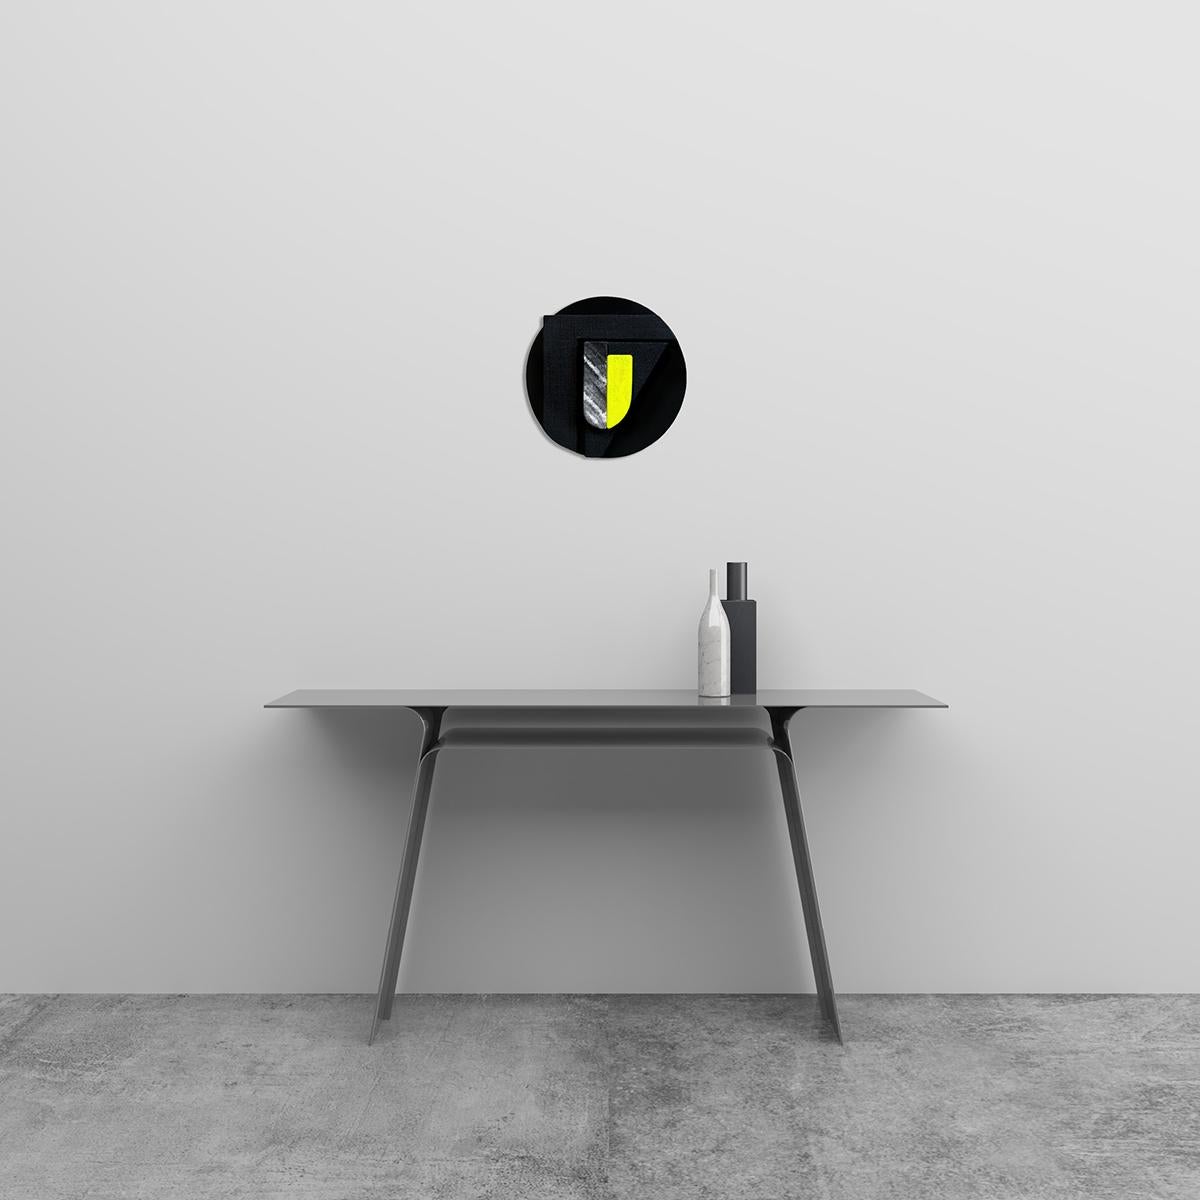 Untitled Black & Yellow - Abstract Painting, Sculpture, Minimal, Jaime Poblete For Sale 2